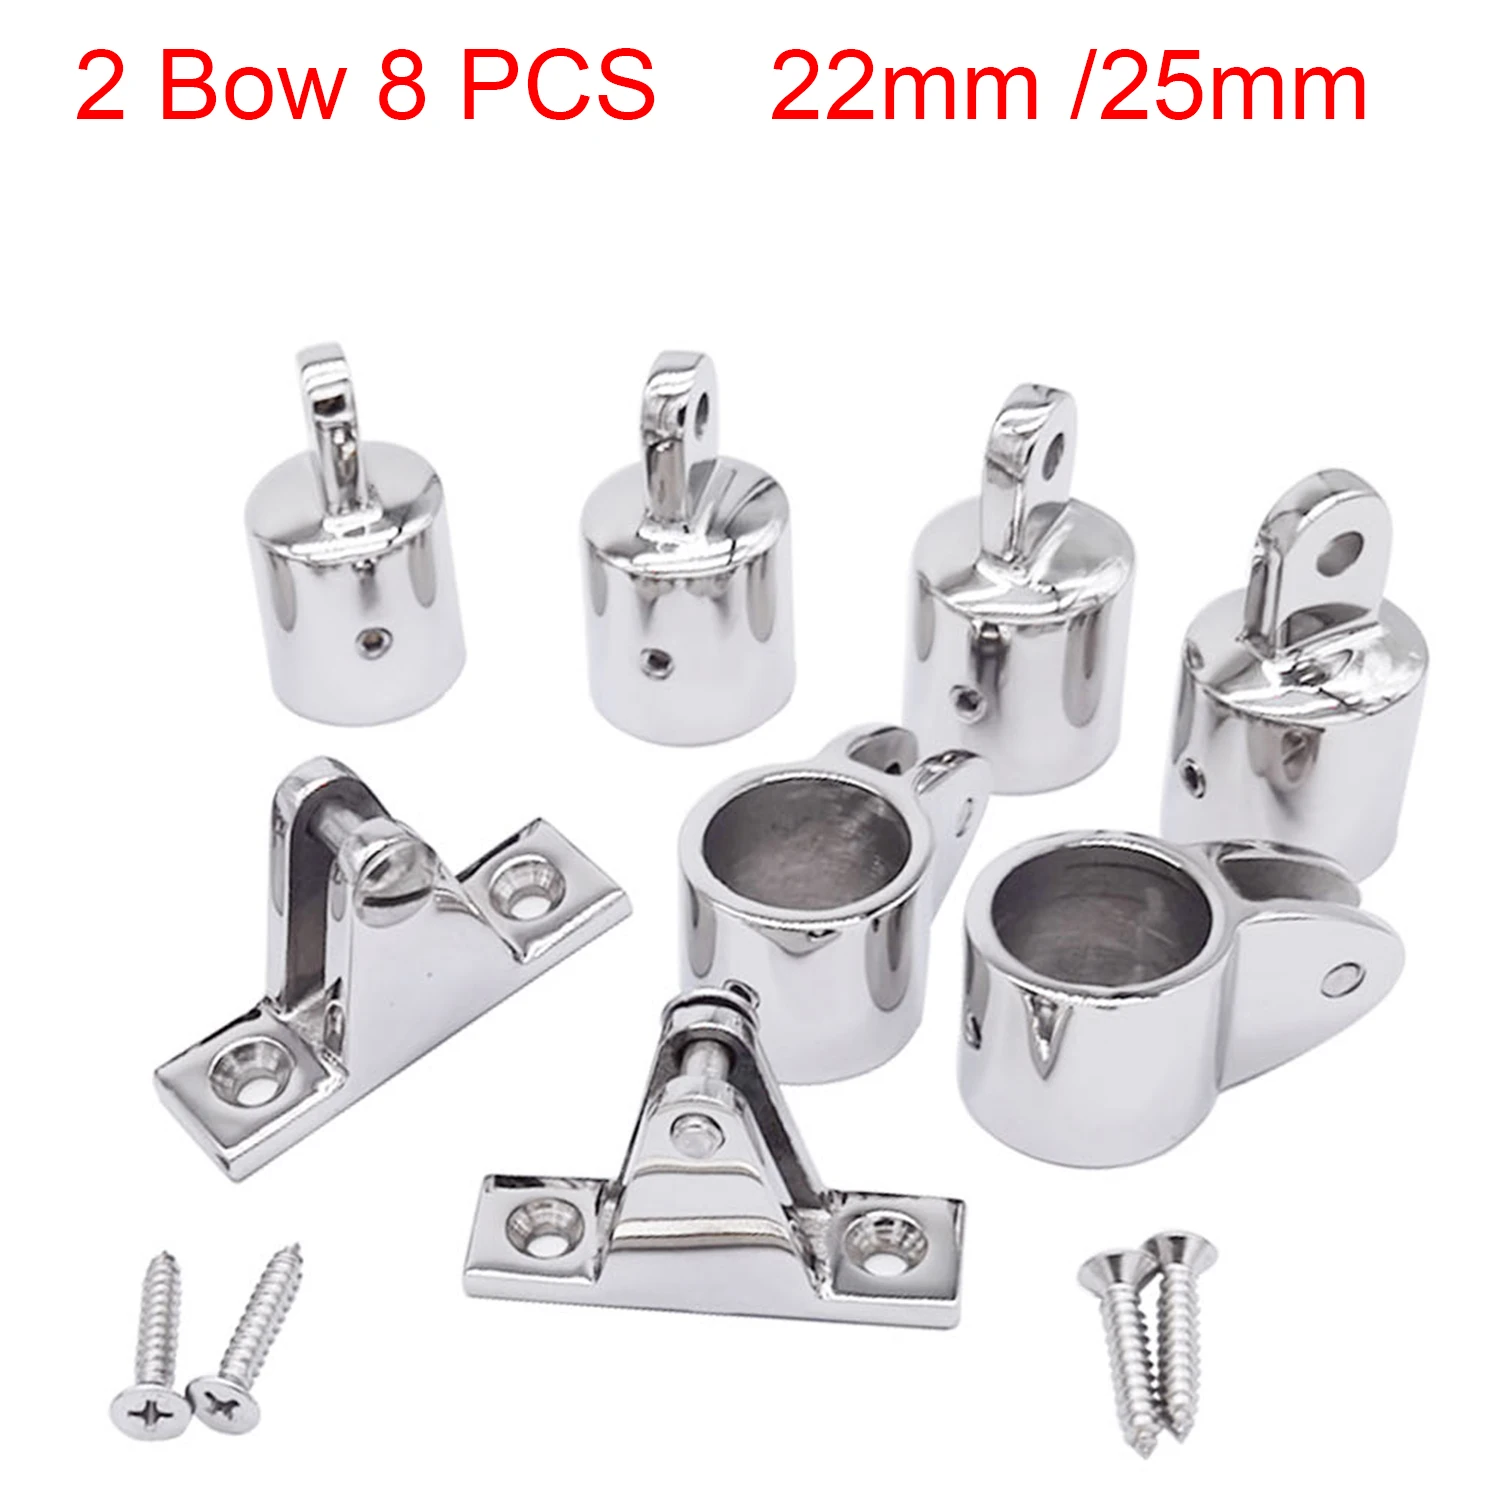 8 PCS Marine 316 Stainless Steel 2-Bow Bimini Top Hardware Fitting Set Deck Hinge Jaw Slide Eye End Fitting for 22/25mm Pipe 6 3mm stainless steel 316quick release pin with lanyard for boat bimini top deck hinge marine hardware